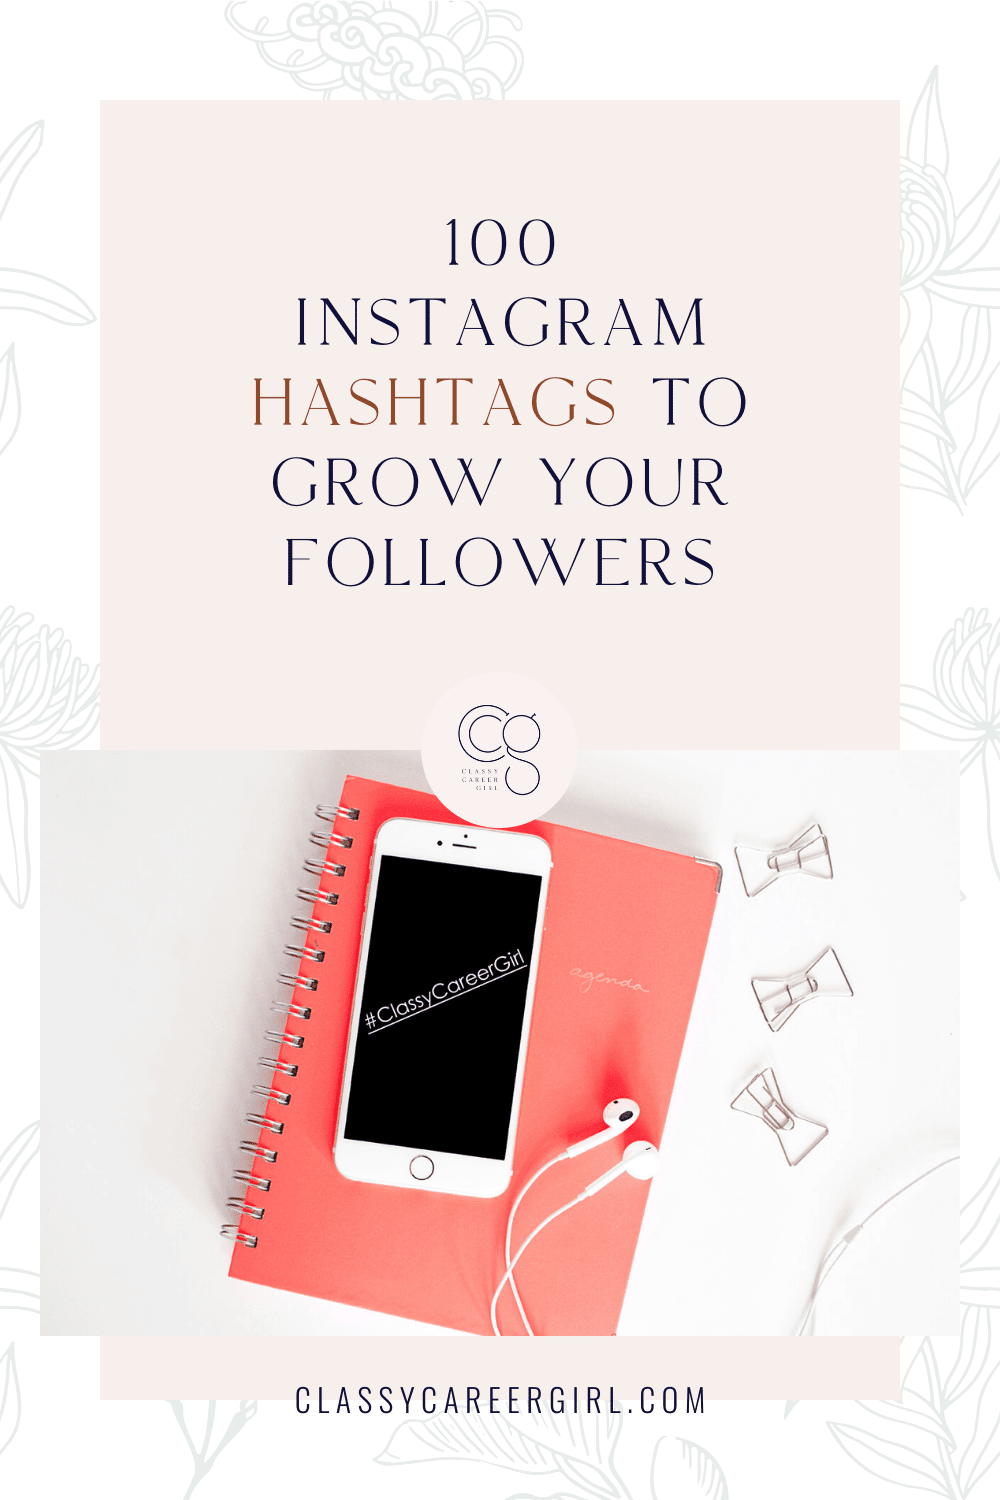 100 Instagram hashtags to grow your followers